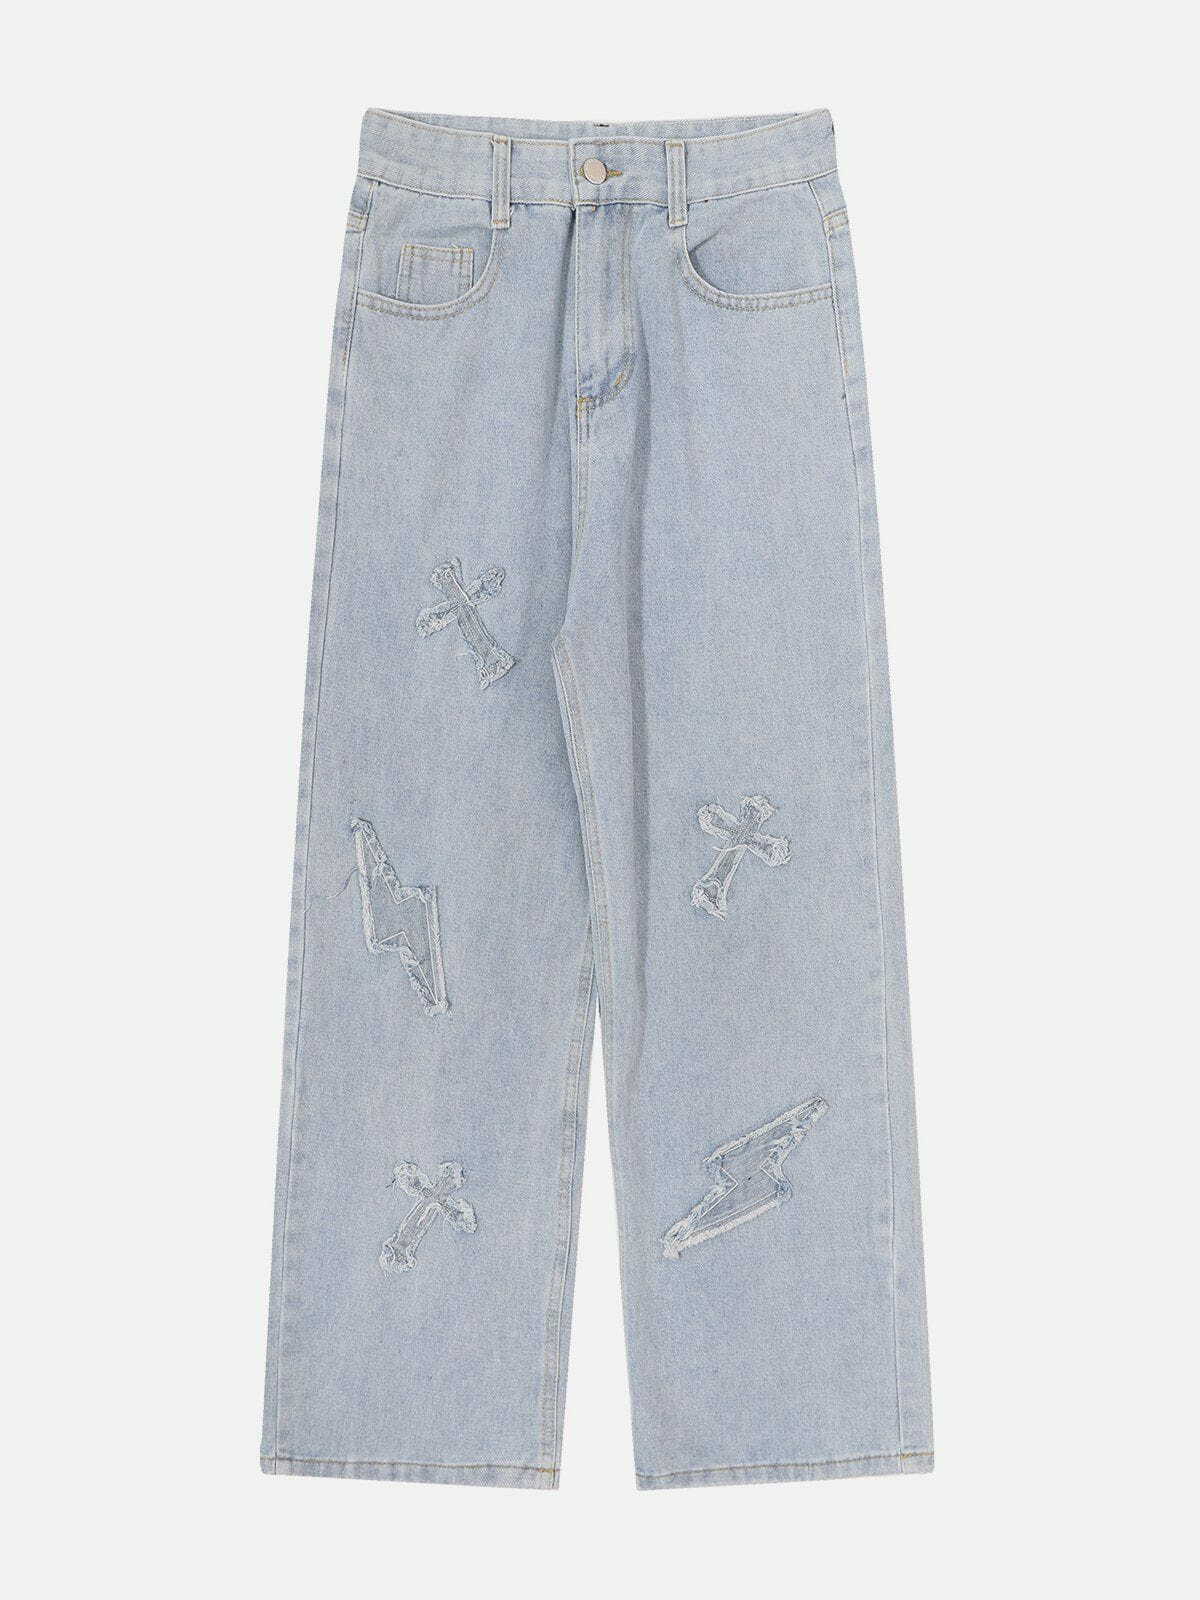 lightning patchwork jeans edgy y2k fashion staple 1988